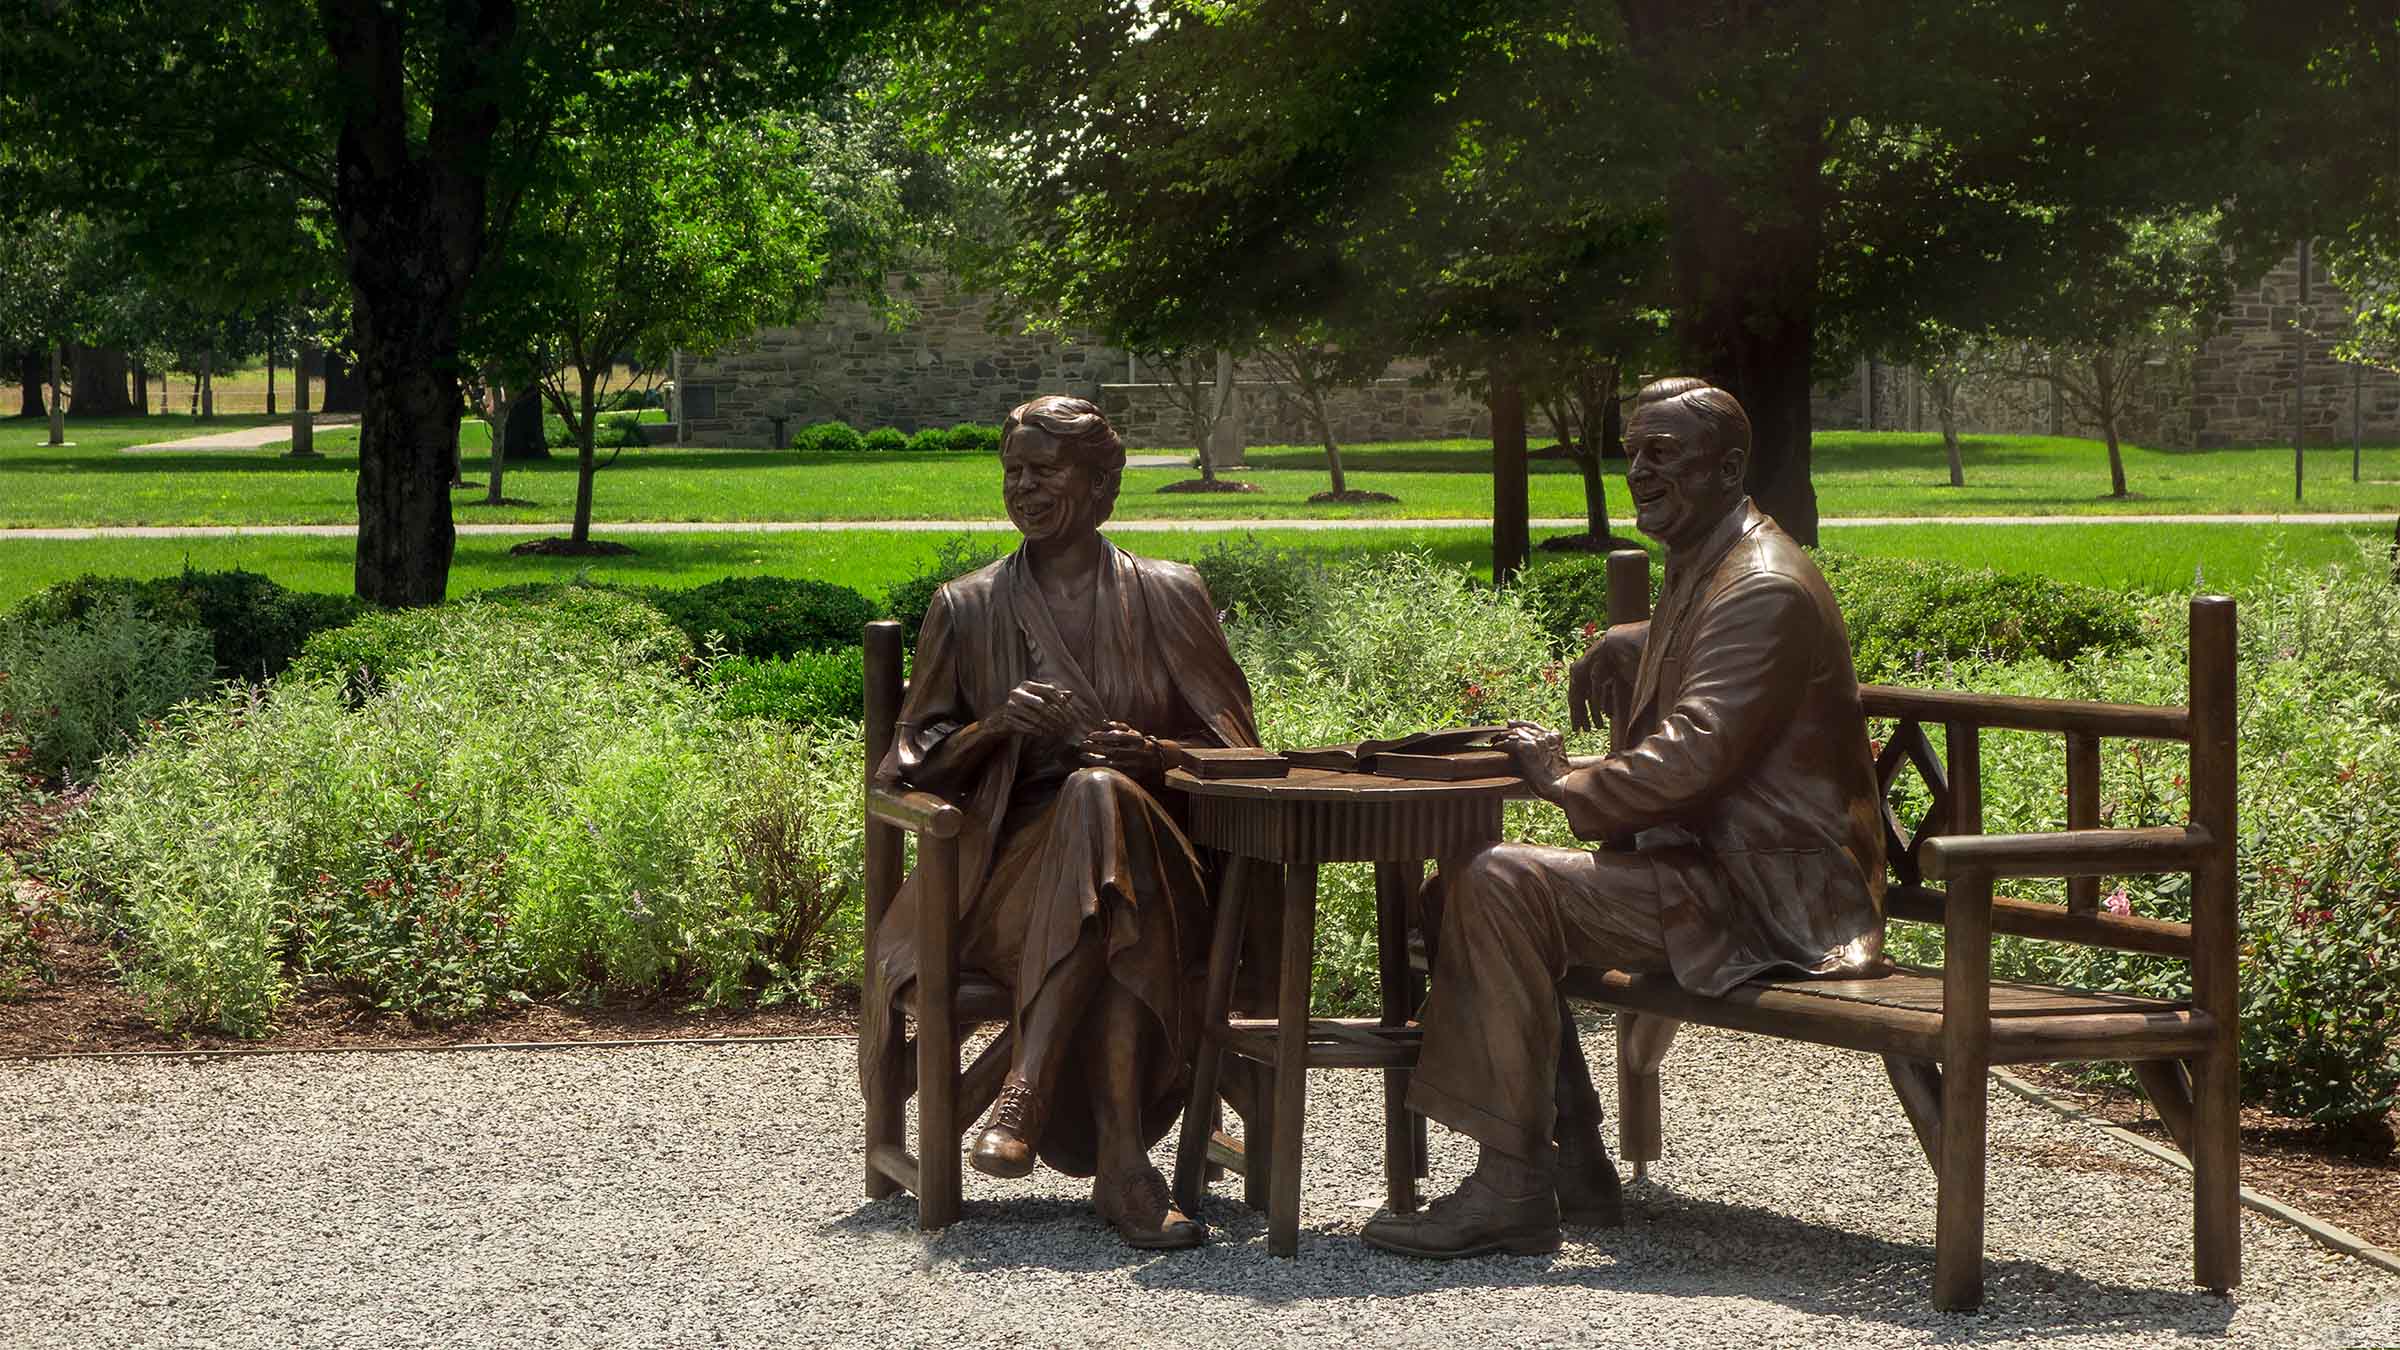 The bronze statue of Franklin and Eleanor Roosevelt